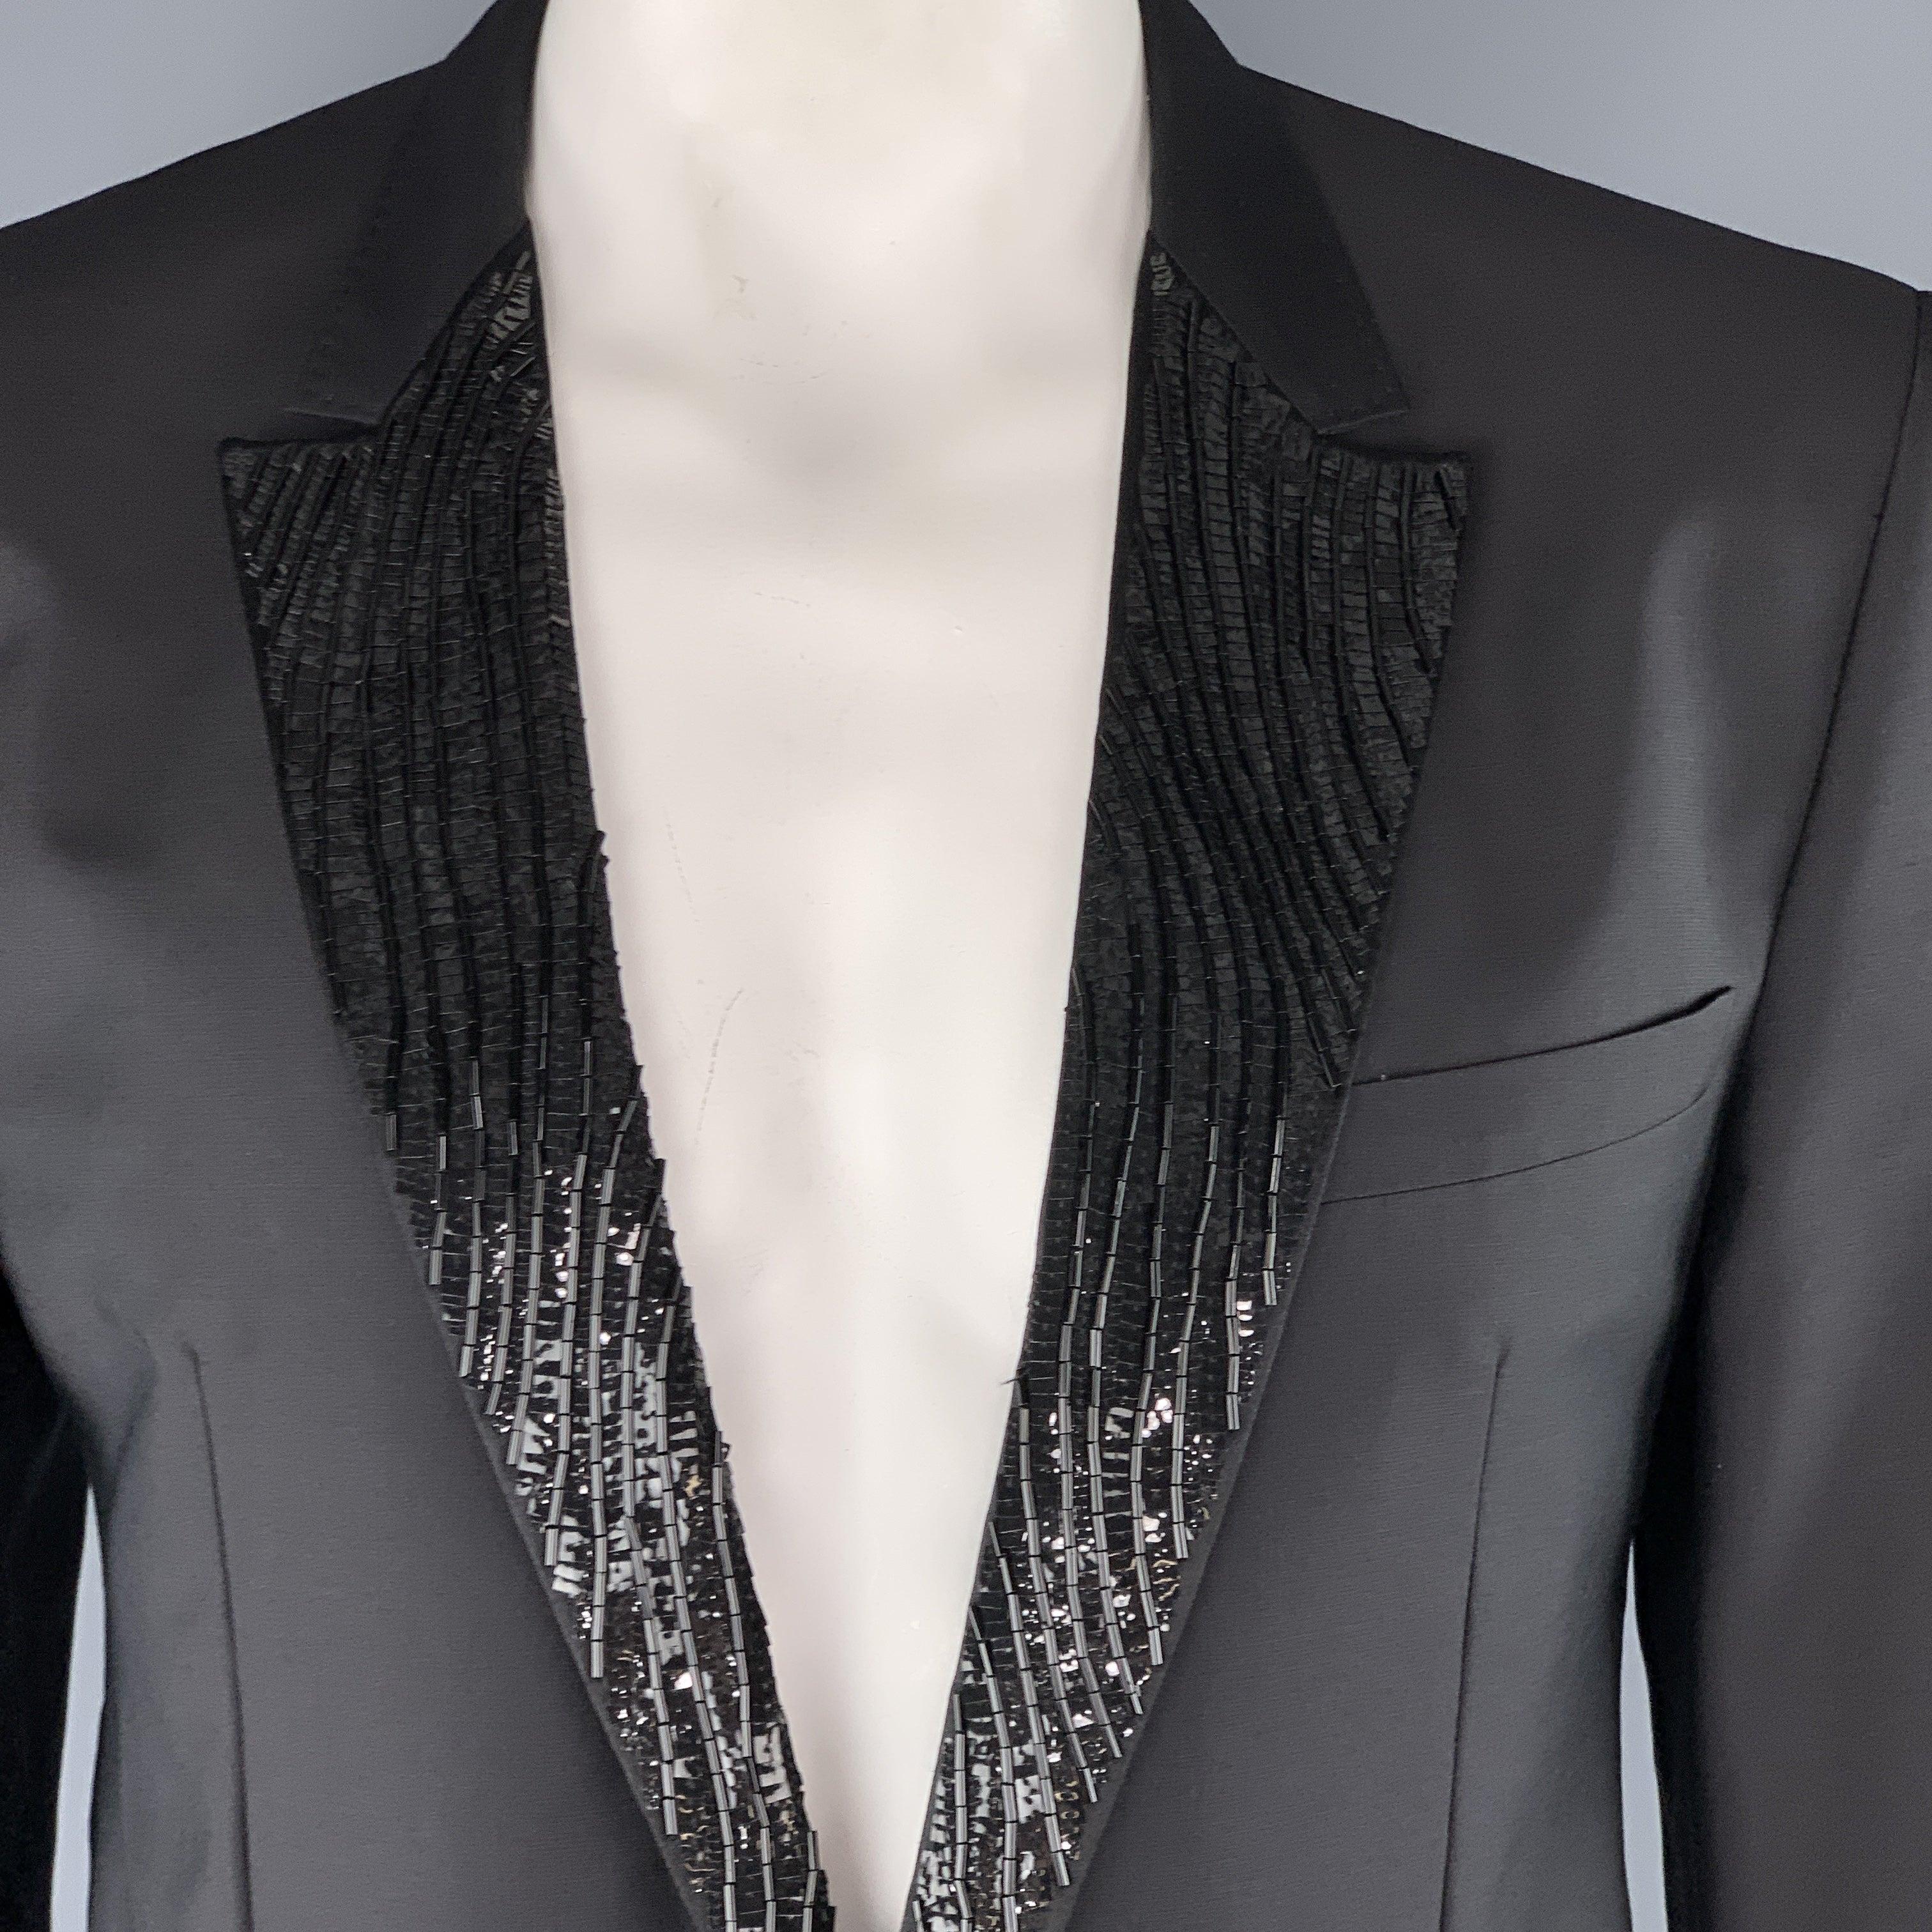 VIKTOR & ROLF
tuxedo sport coat comes in black mohair blend fabric with a sequin beaded peak lapel, single breasted, one button front, and single vented back. Made in Italy.Excellent Pre-Owned Condition. 

Marked:   EU 56 

Measurements: 
